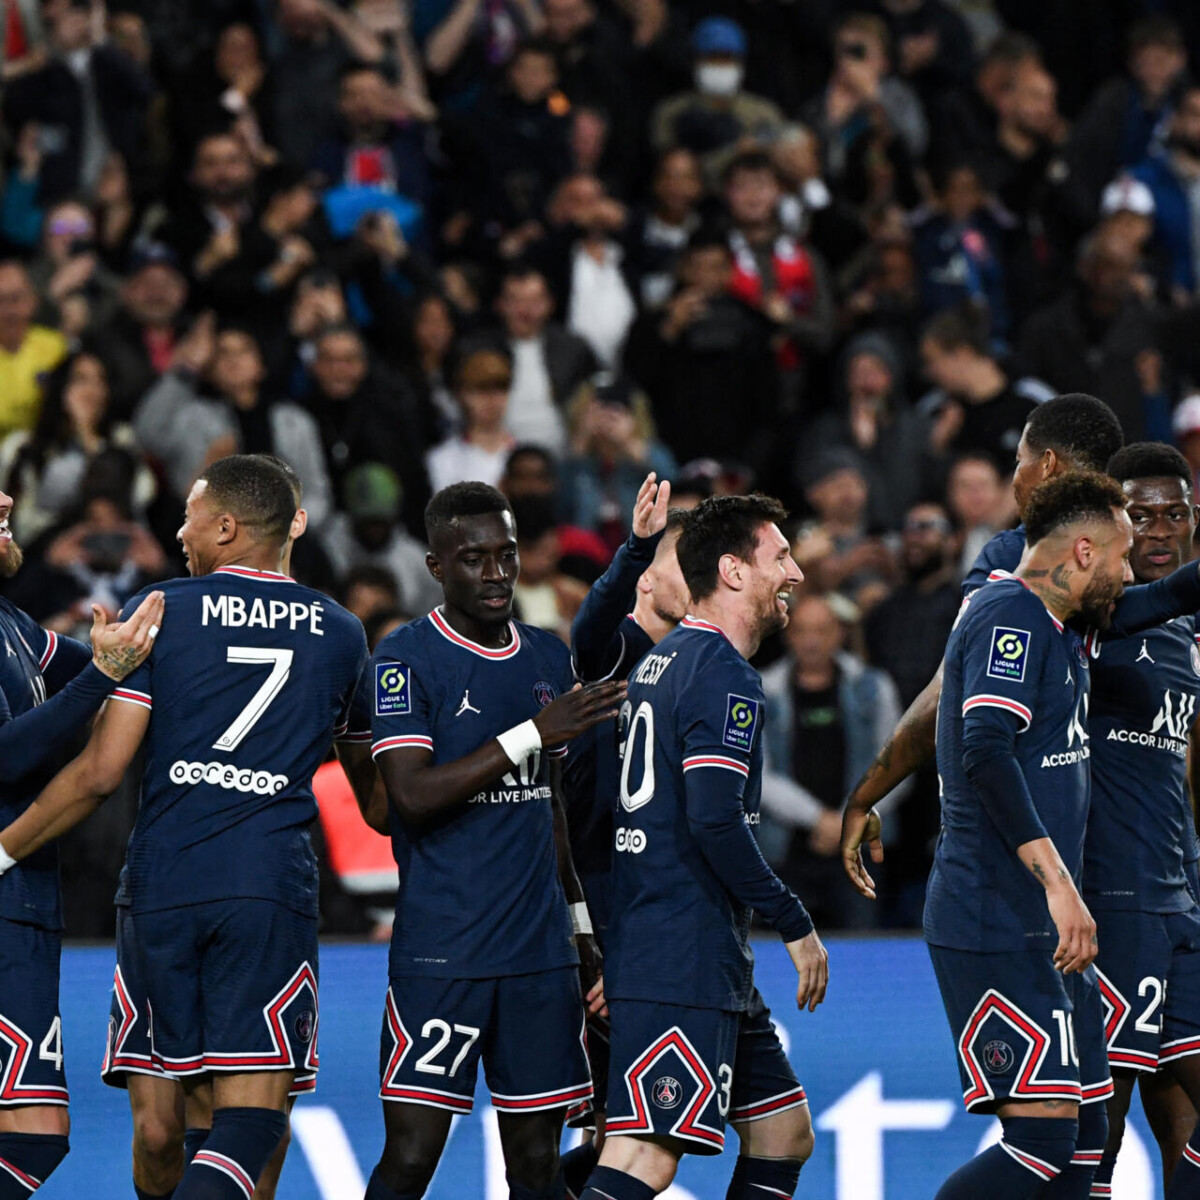 2022/23 Ligue 1 title lifted by PSG